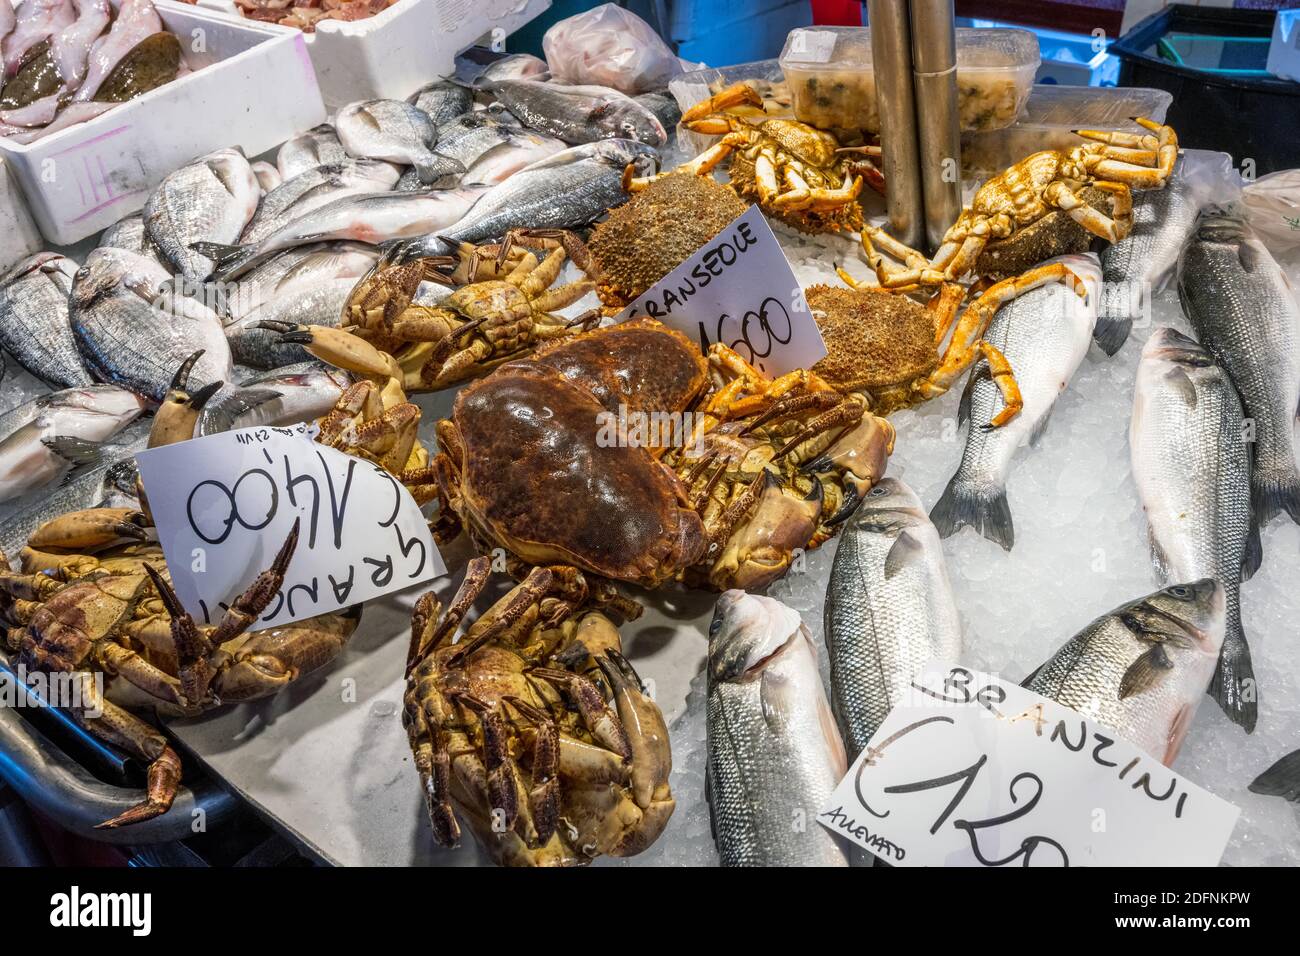 Fish and crustaceans for sale at a market Stock Photo